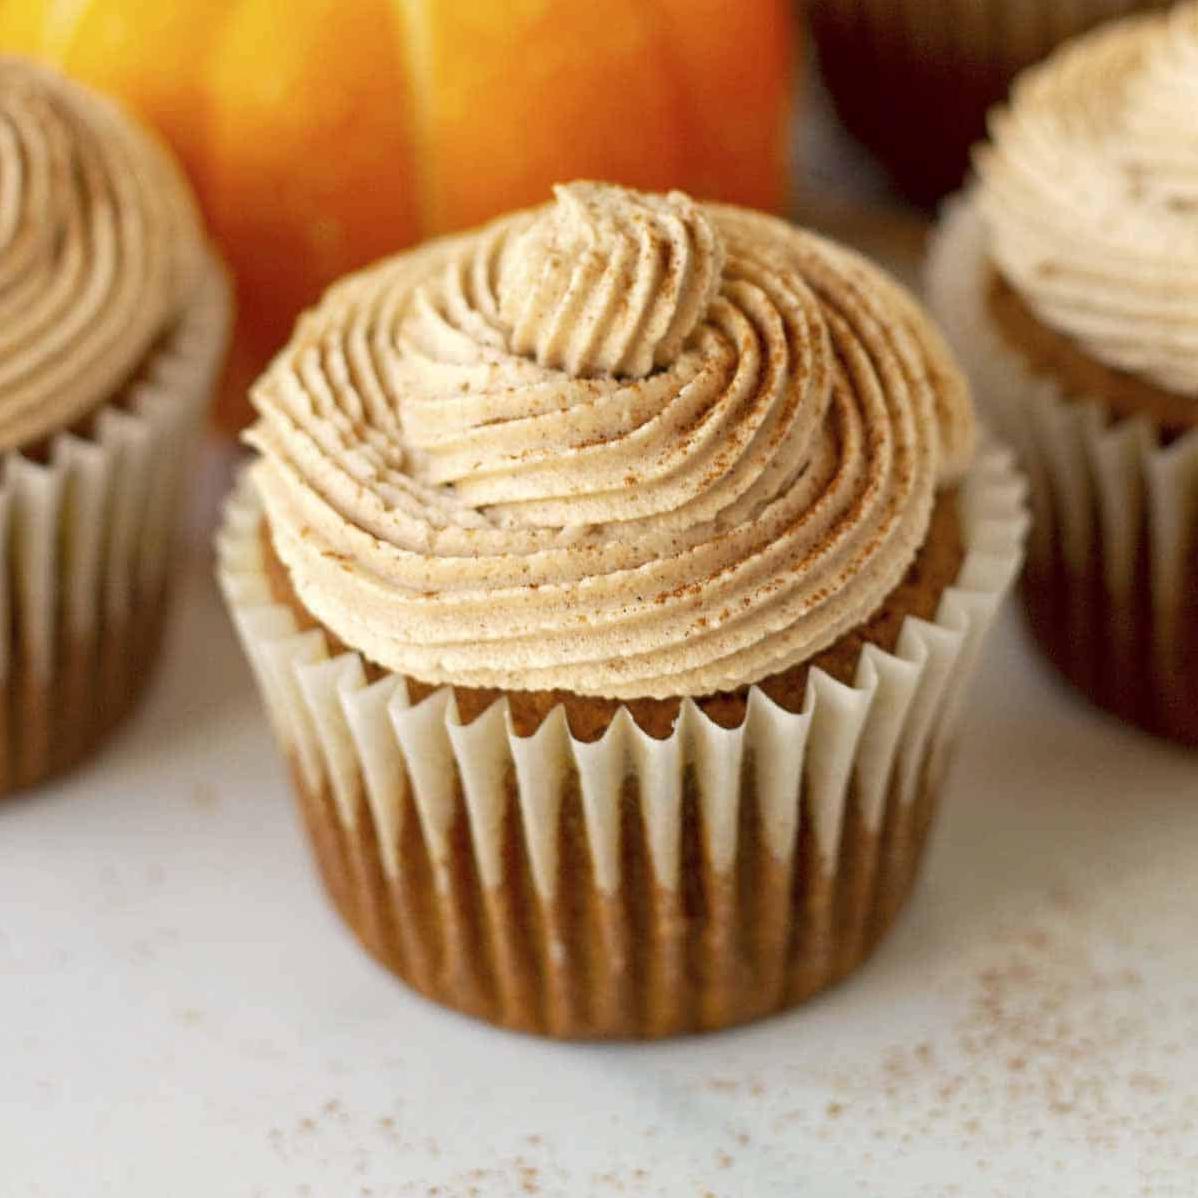  Enjoy the taste of fall with every bite of these pumpkin cupcakes